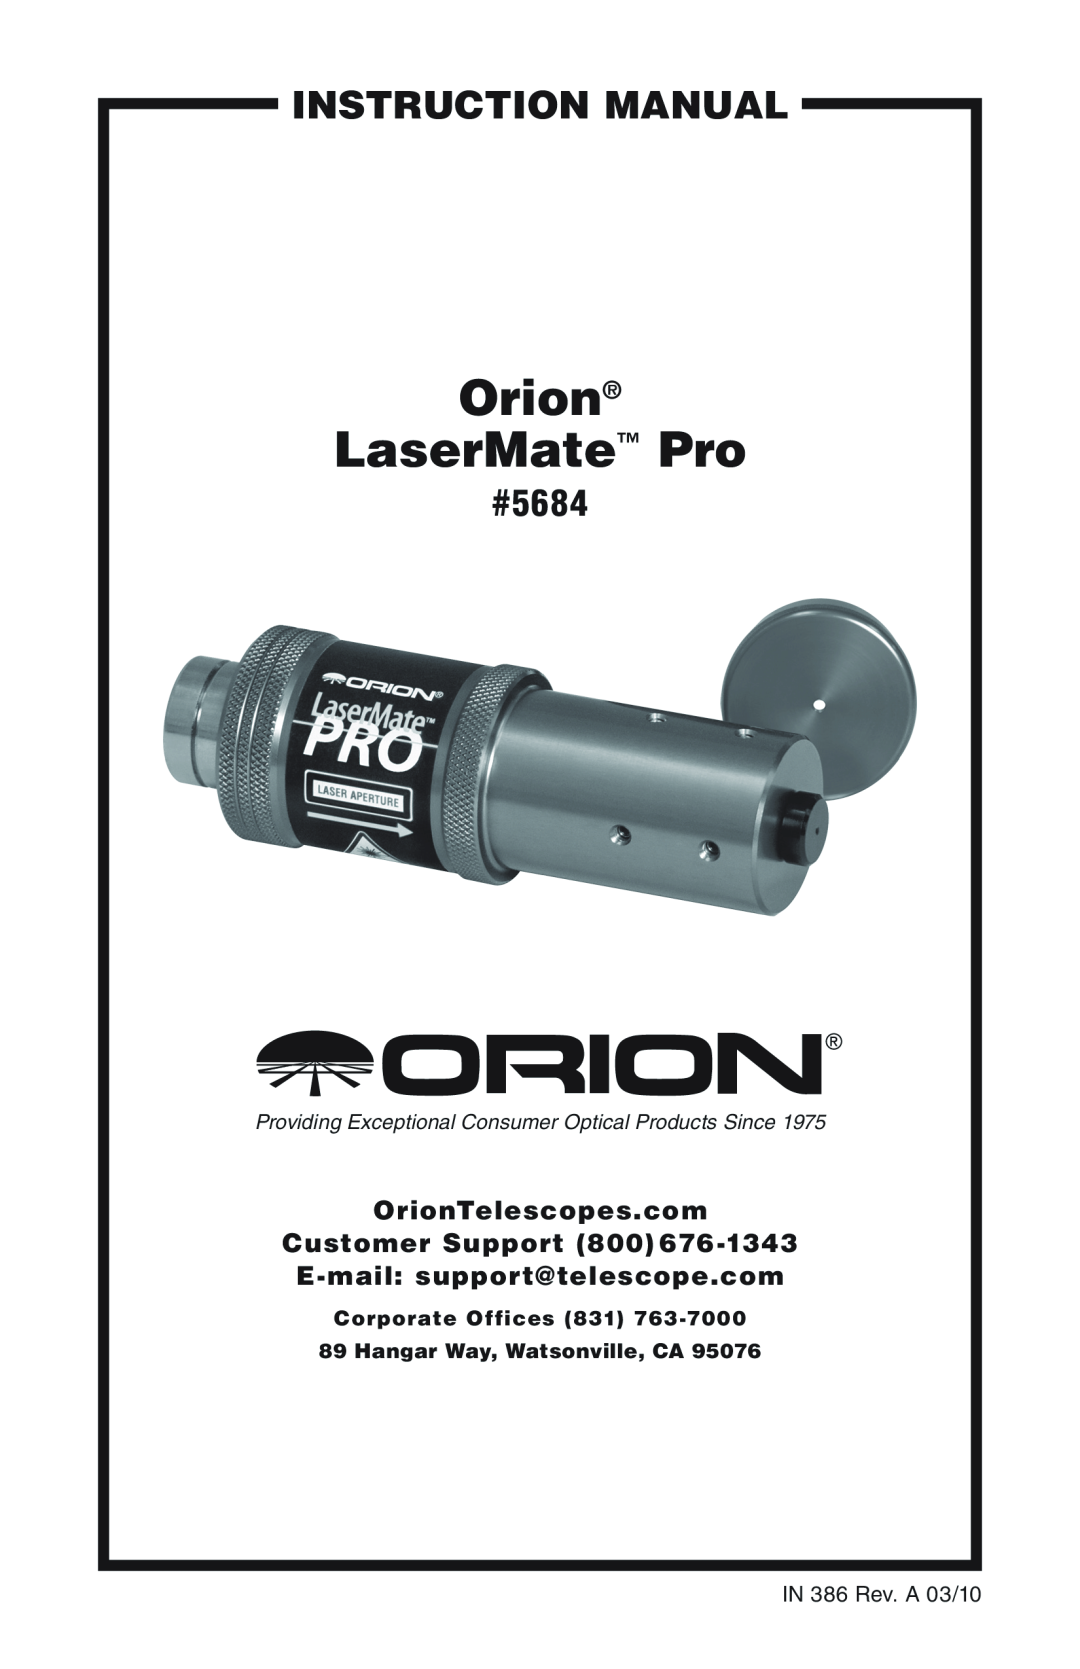 Orion instruction manual Orion LaserMate Pro, #5684, IN 386 Rev. A 03/10 